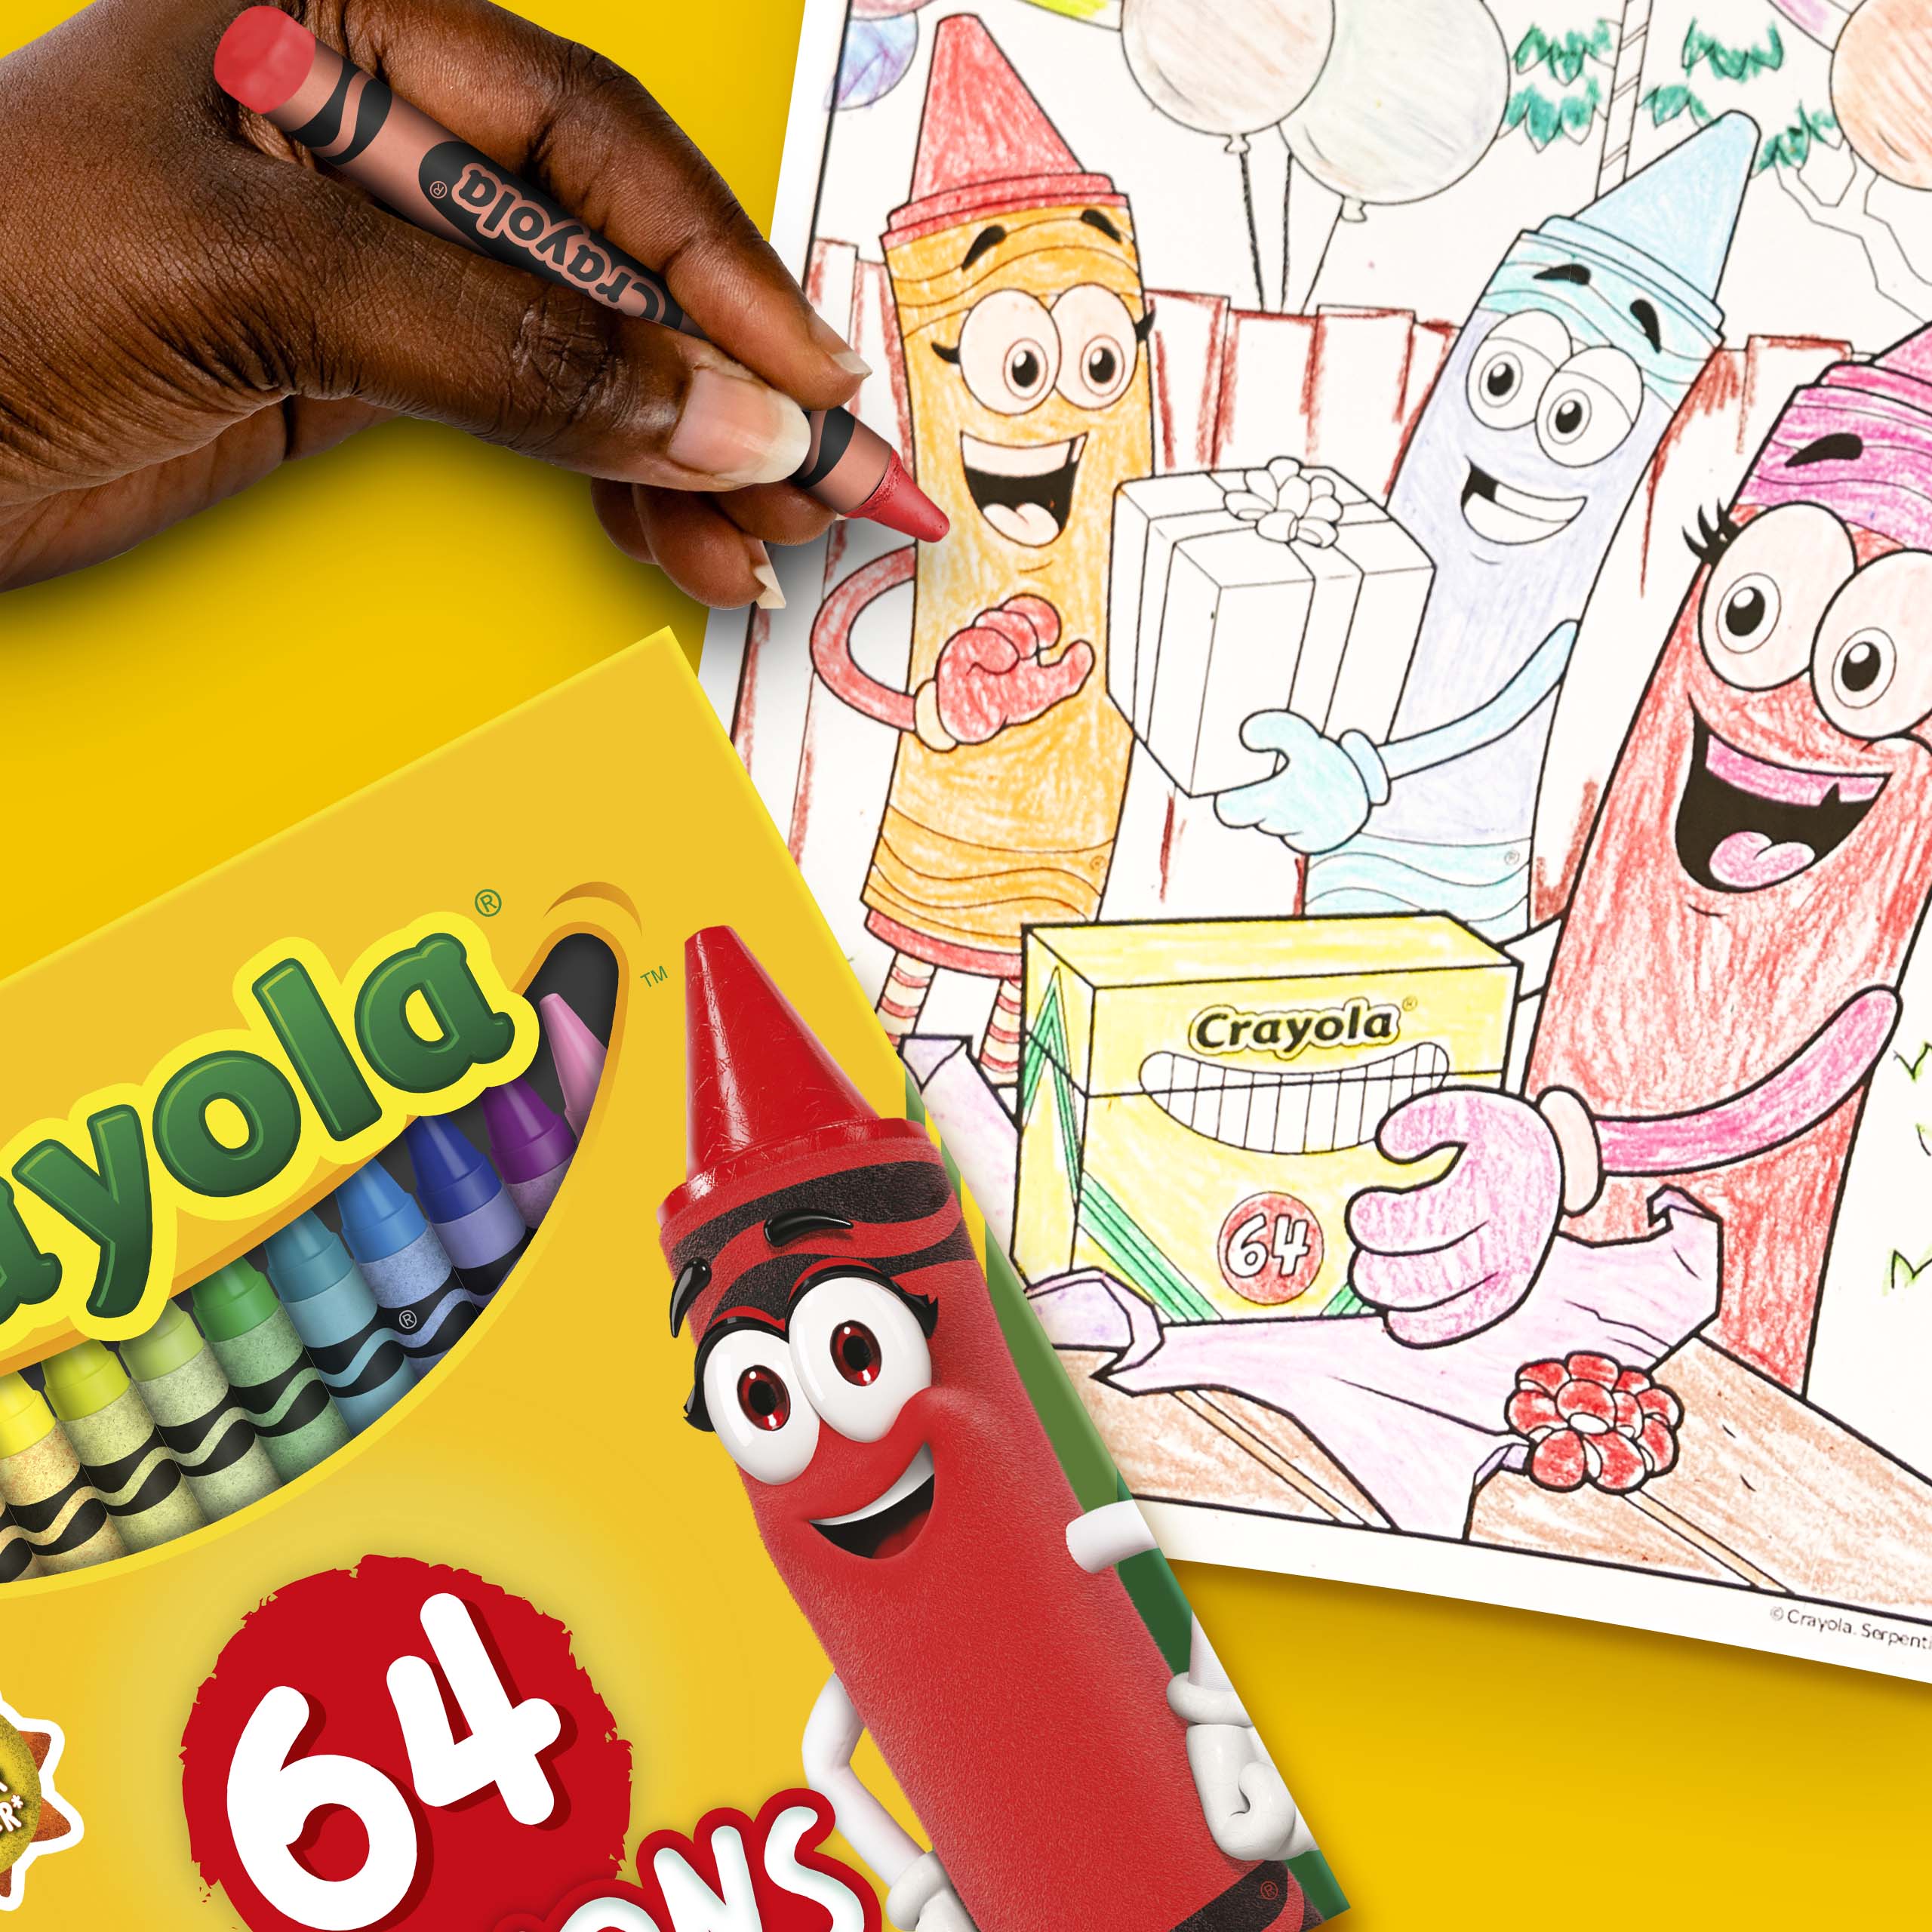 Crayola Crayons, 64 Ct, Back to School Supplies for Kids, Teacher Supplies, Gift - image 7 of 10